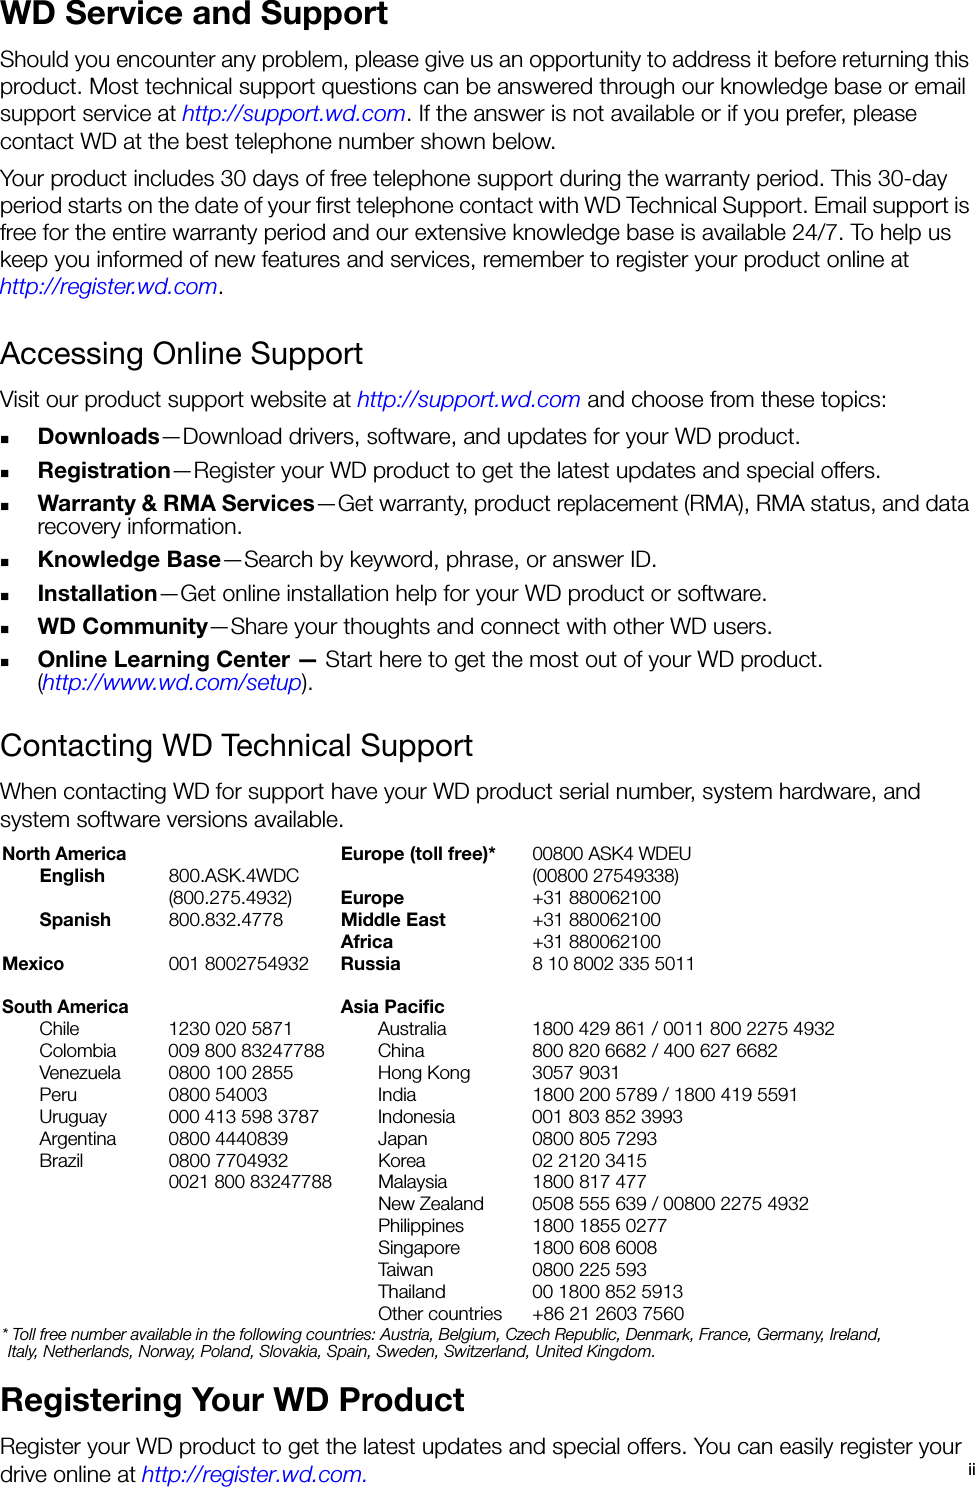 iiWD Service and SupportShould you encounter any problem, please give us an opportunity to address it before returning this product. Most technical support questions can be answered through our knowledge base or email support service at http://support.wd.com. If the answer is not available or if you prefer, please contact WD at the best telephone number shown below.Your product includes 30 days of free telephone support during the warranty period. This 30-day period starts on the date of your first telephone contact with WD Technical Support. Email support is free for the entire warranty period and our extensive knowledge base is available 24/7. To help us keep you informed of new features and services, remember to register your product online at http://register.wd.com.Accessing Online SupportVisit our product support website at http://support.wd.com and choose from these topics:Downloads—Download drivers, software, and updates for your WD product.Registration—Register your WD product to get the latest updates and special offers.Warranty &amp; RMA Services—Get warranty, product replacement (RMA), RMA status, and data recovery information.Knowledge Base—Search by keyword, phrase, or answer ID. Installation—Get online installation help for your WD product or software.WD Community—Share your thoughts and connect with other WD users.Online Learning Center — Start here to get the most out of your WD product. (http://www.wd.com/setup). Contacting WD Technical Support When contacting WD for support have your WD product serial number, system hardware, and system software versions available.Registering Your WD ProductRegister your WD product to get the latest updates and special offers. You can easily register your drive online at http://register.wd.com.North AmericaEurope (toll free)*00800 ASK4 WDEUEnglish 800.ASK.4WDC(00800 27549338)(800.275.4932) Europe+31 880062100Spanish 800.832.4778 Middle East+31 880062100Africa+31 880062100Mexico001 8002754932 Russia8 10 8002 335 5011South AmericaAsia PacificChile  1230 020 5871 Australia 1800 429 861 / 0011 800 2275 4932Colombia 009 800 83247788 China 800 820 6682 / 400 627 6682Venezuela  0800 100 2855 Hong Kong 3057 9031Peru 0800 54003 India 1800 200 5789 / 1800 419 5591Uruguay 000 413 598 3787 Indonesia 001 803 852 3993Argentina 0800 4440839 Japan 0800 805 7293Brazil 0800 7704932  Korea 02 2120 34150021 800 83247788Malaysia 1800 817 477New Zealand 0508 555 639 / 00800 2275 4932Philippines 1800 1855 0277Singapore 1800 608 6008Taiwan 0800 225 593Thailand 00 1800 852 5913Other countries +86 21 2603 7560* Toll free number available in the following countries: Austria, Belgium, Czech Republic, Denmark, France, Germany, Ireland, Italy, Netherlands, Norway, Poland, Slovakia, Spain, Sweden, Switzerland, United Kingdom. 